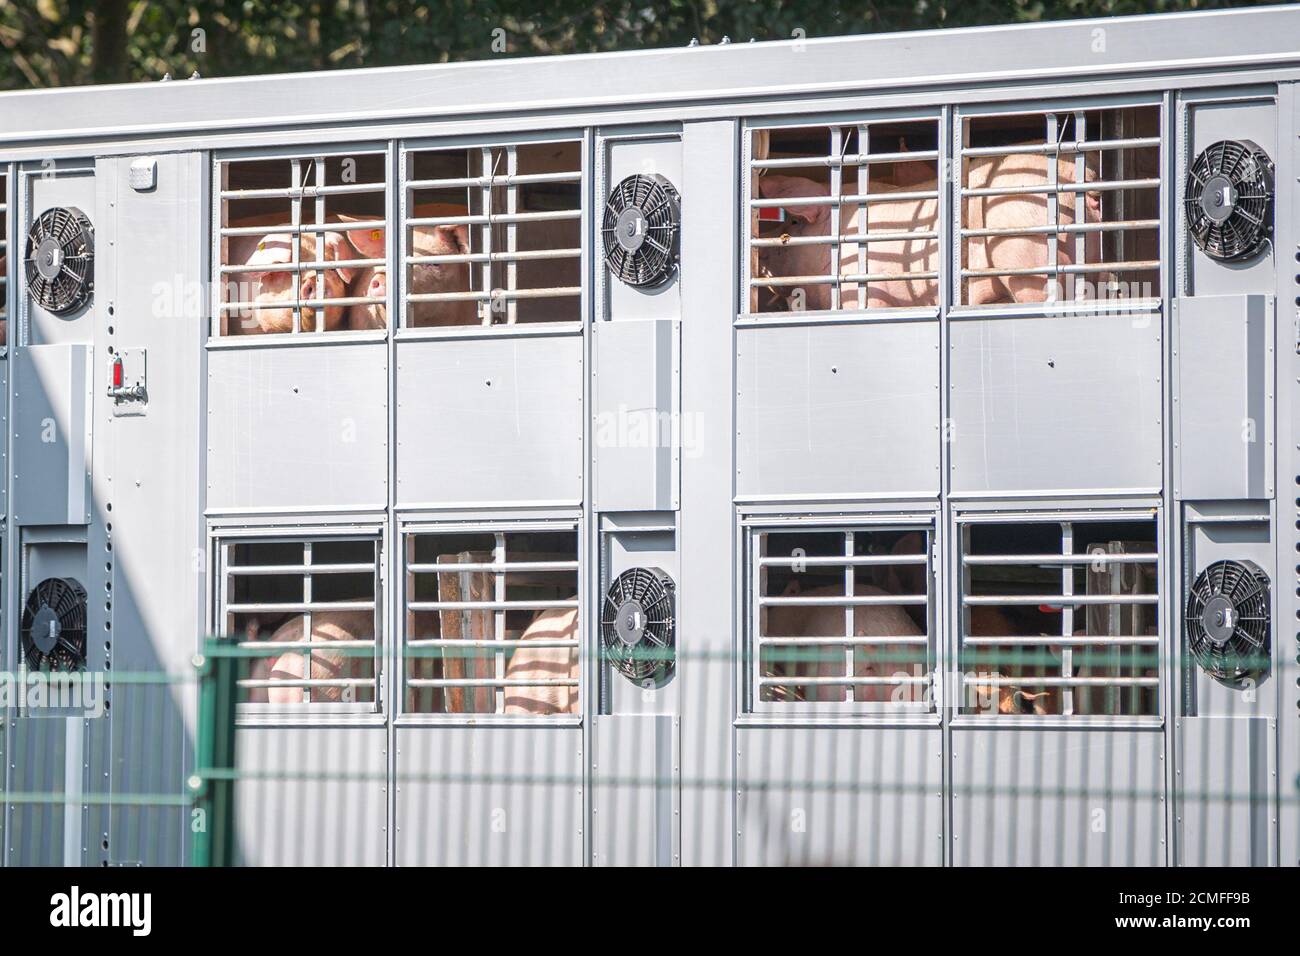 17 September 2020, Lower Saxony, Sögel: A pig transporter with pigs drives to the premises of a slaughterhouse in Sögel. Animal welfare activists protest in front of the slaughterhouse's premises after defects and infringements have become known at a nearby pig fattening farm in the district of Emsland. According to the association 'Deutsches Tierschutzbüro', the company in Sögel is one of the main buyers of pigs from the affected fattening farm and belongs to the Tönnies group of companies. The Tönnies group defended itself against the accusations of the animal rights organization. Photo: Moh Stock Photo